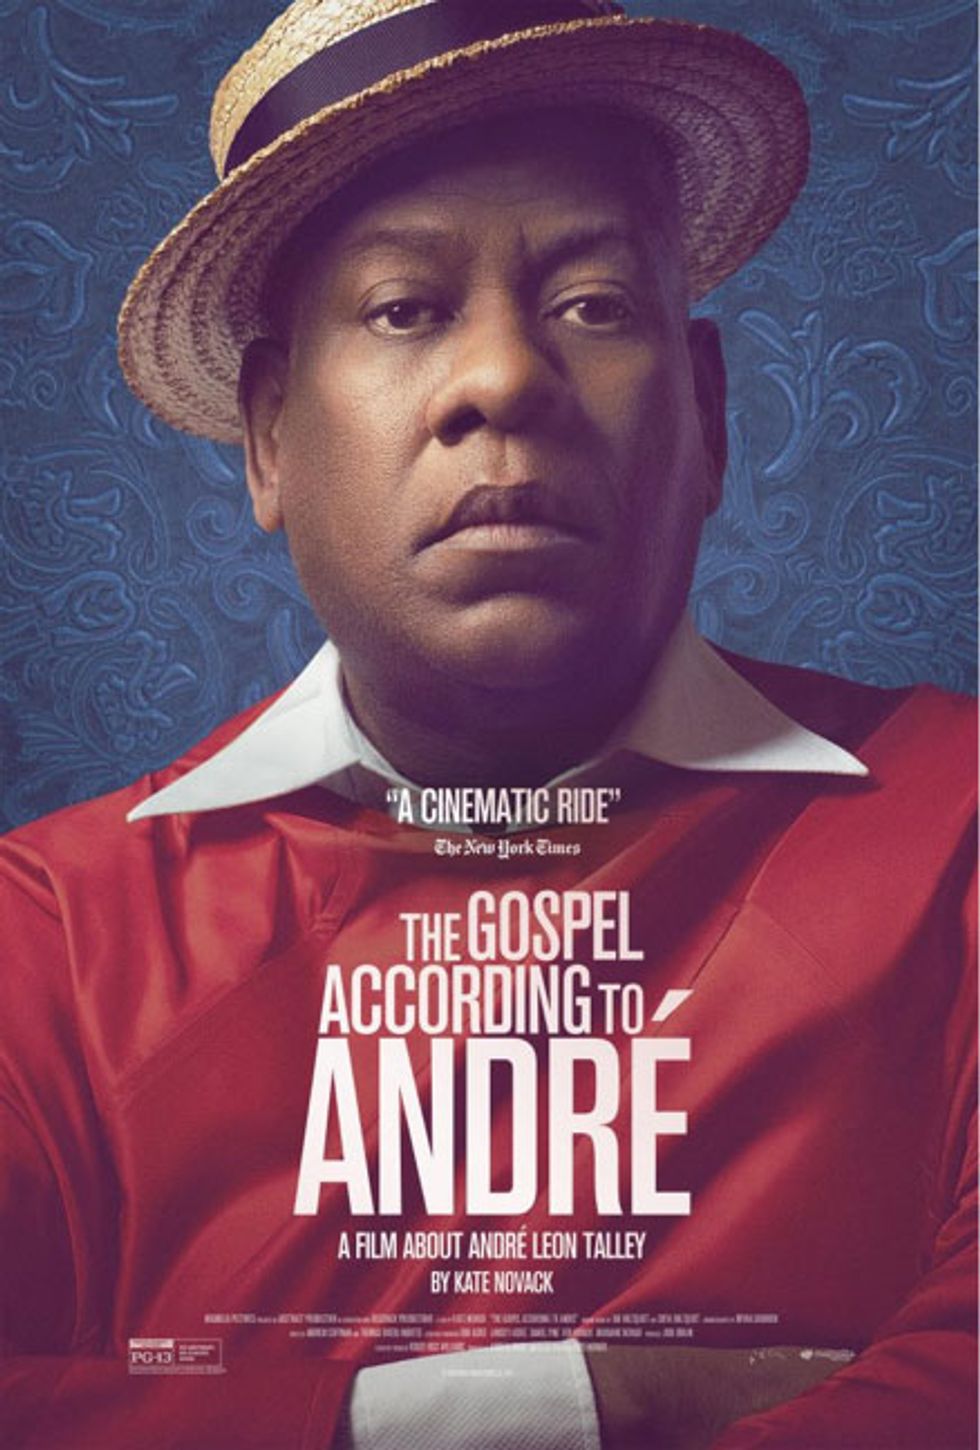 The Gospel According to Andre is an inspiring and uplifting documentary. (Image courtesy of Magnolia Pictures.)